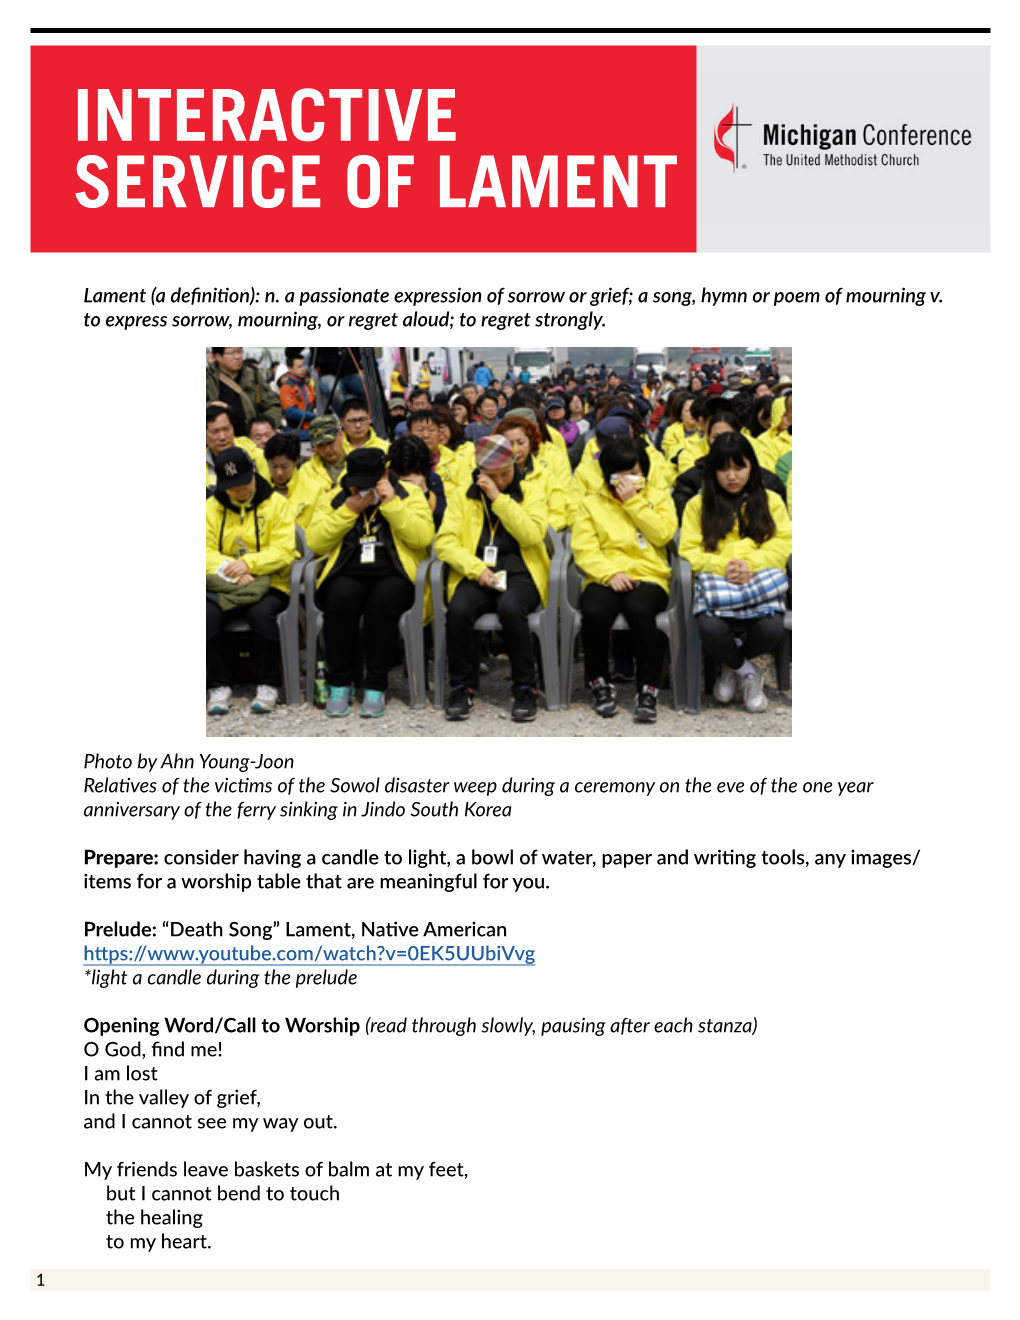 Interactive Service of Lament